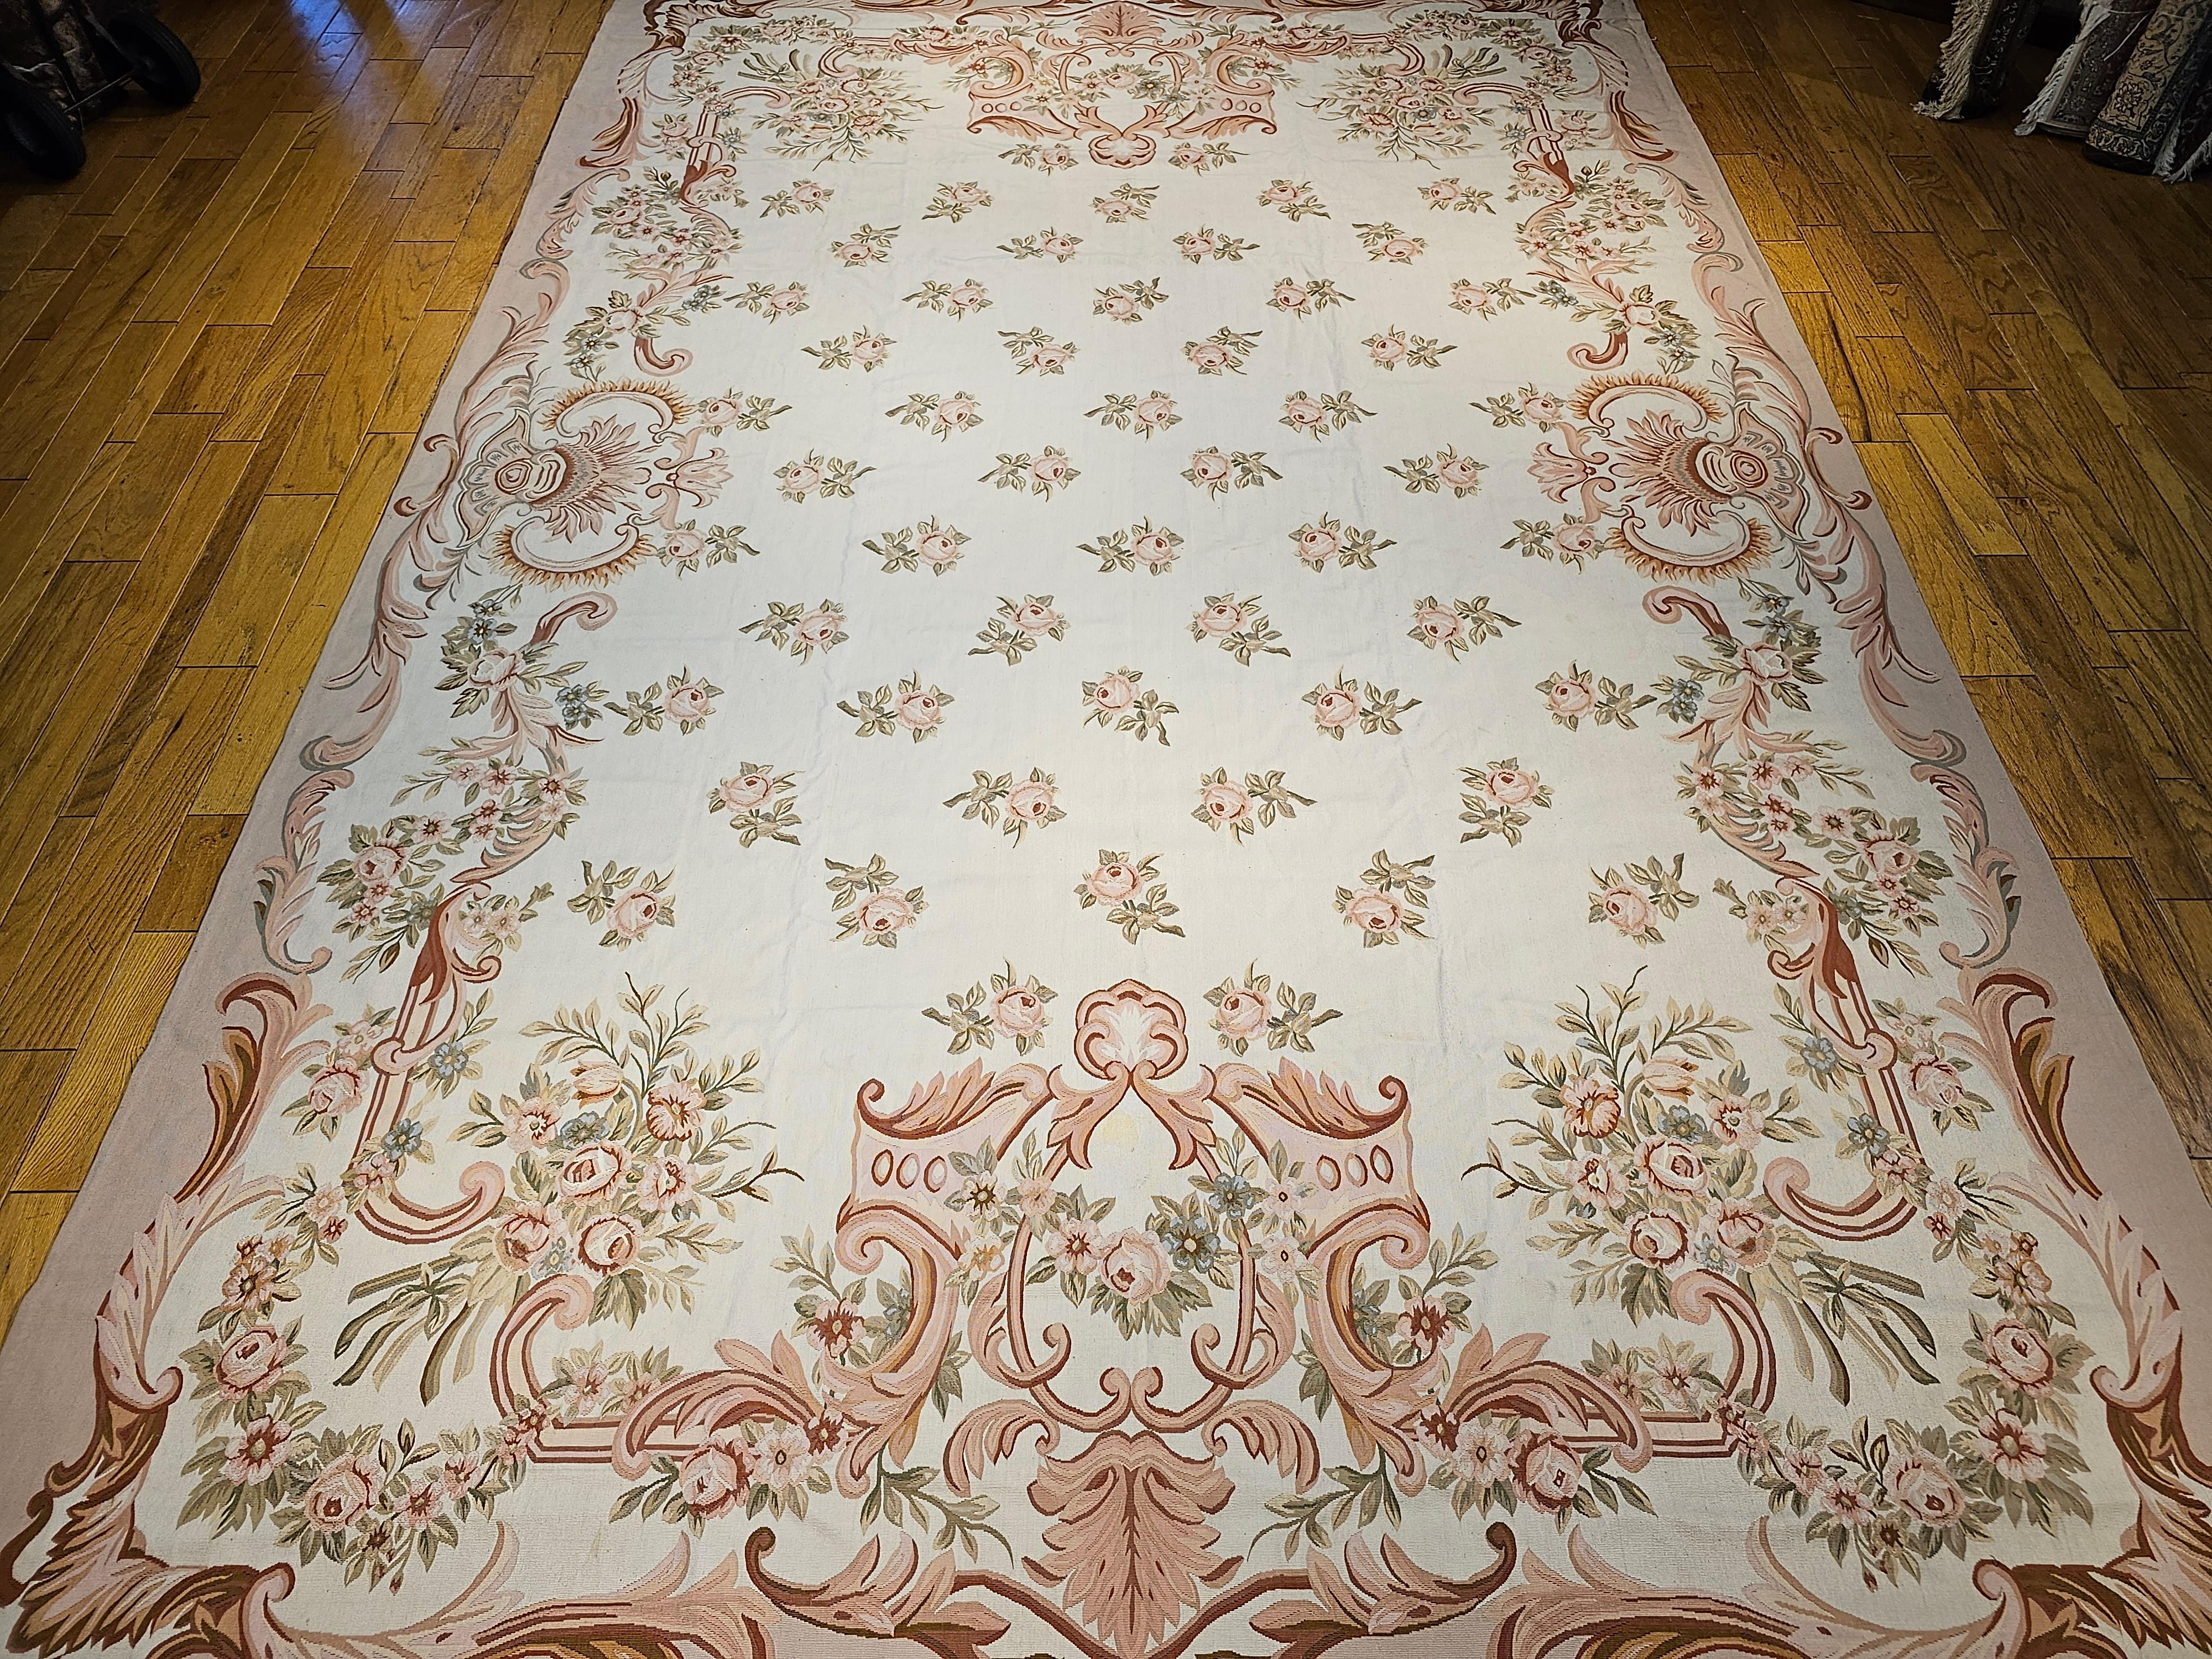 Beautiful Vintage  oversized Aubusson design flat-woven tapestry rug in a simple repeated floral bouquet pattern in light or pale taupe, sage, pale blue, brown, and pale pink.   The vintage oversized tapestry woven rug brings elegance and grandeur